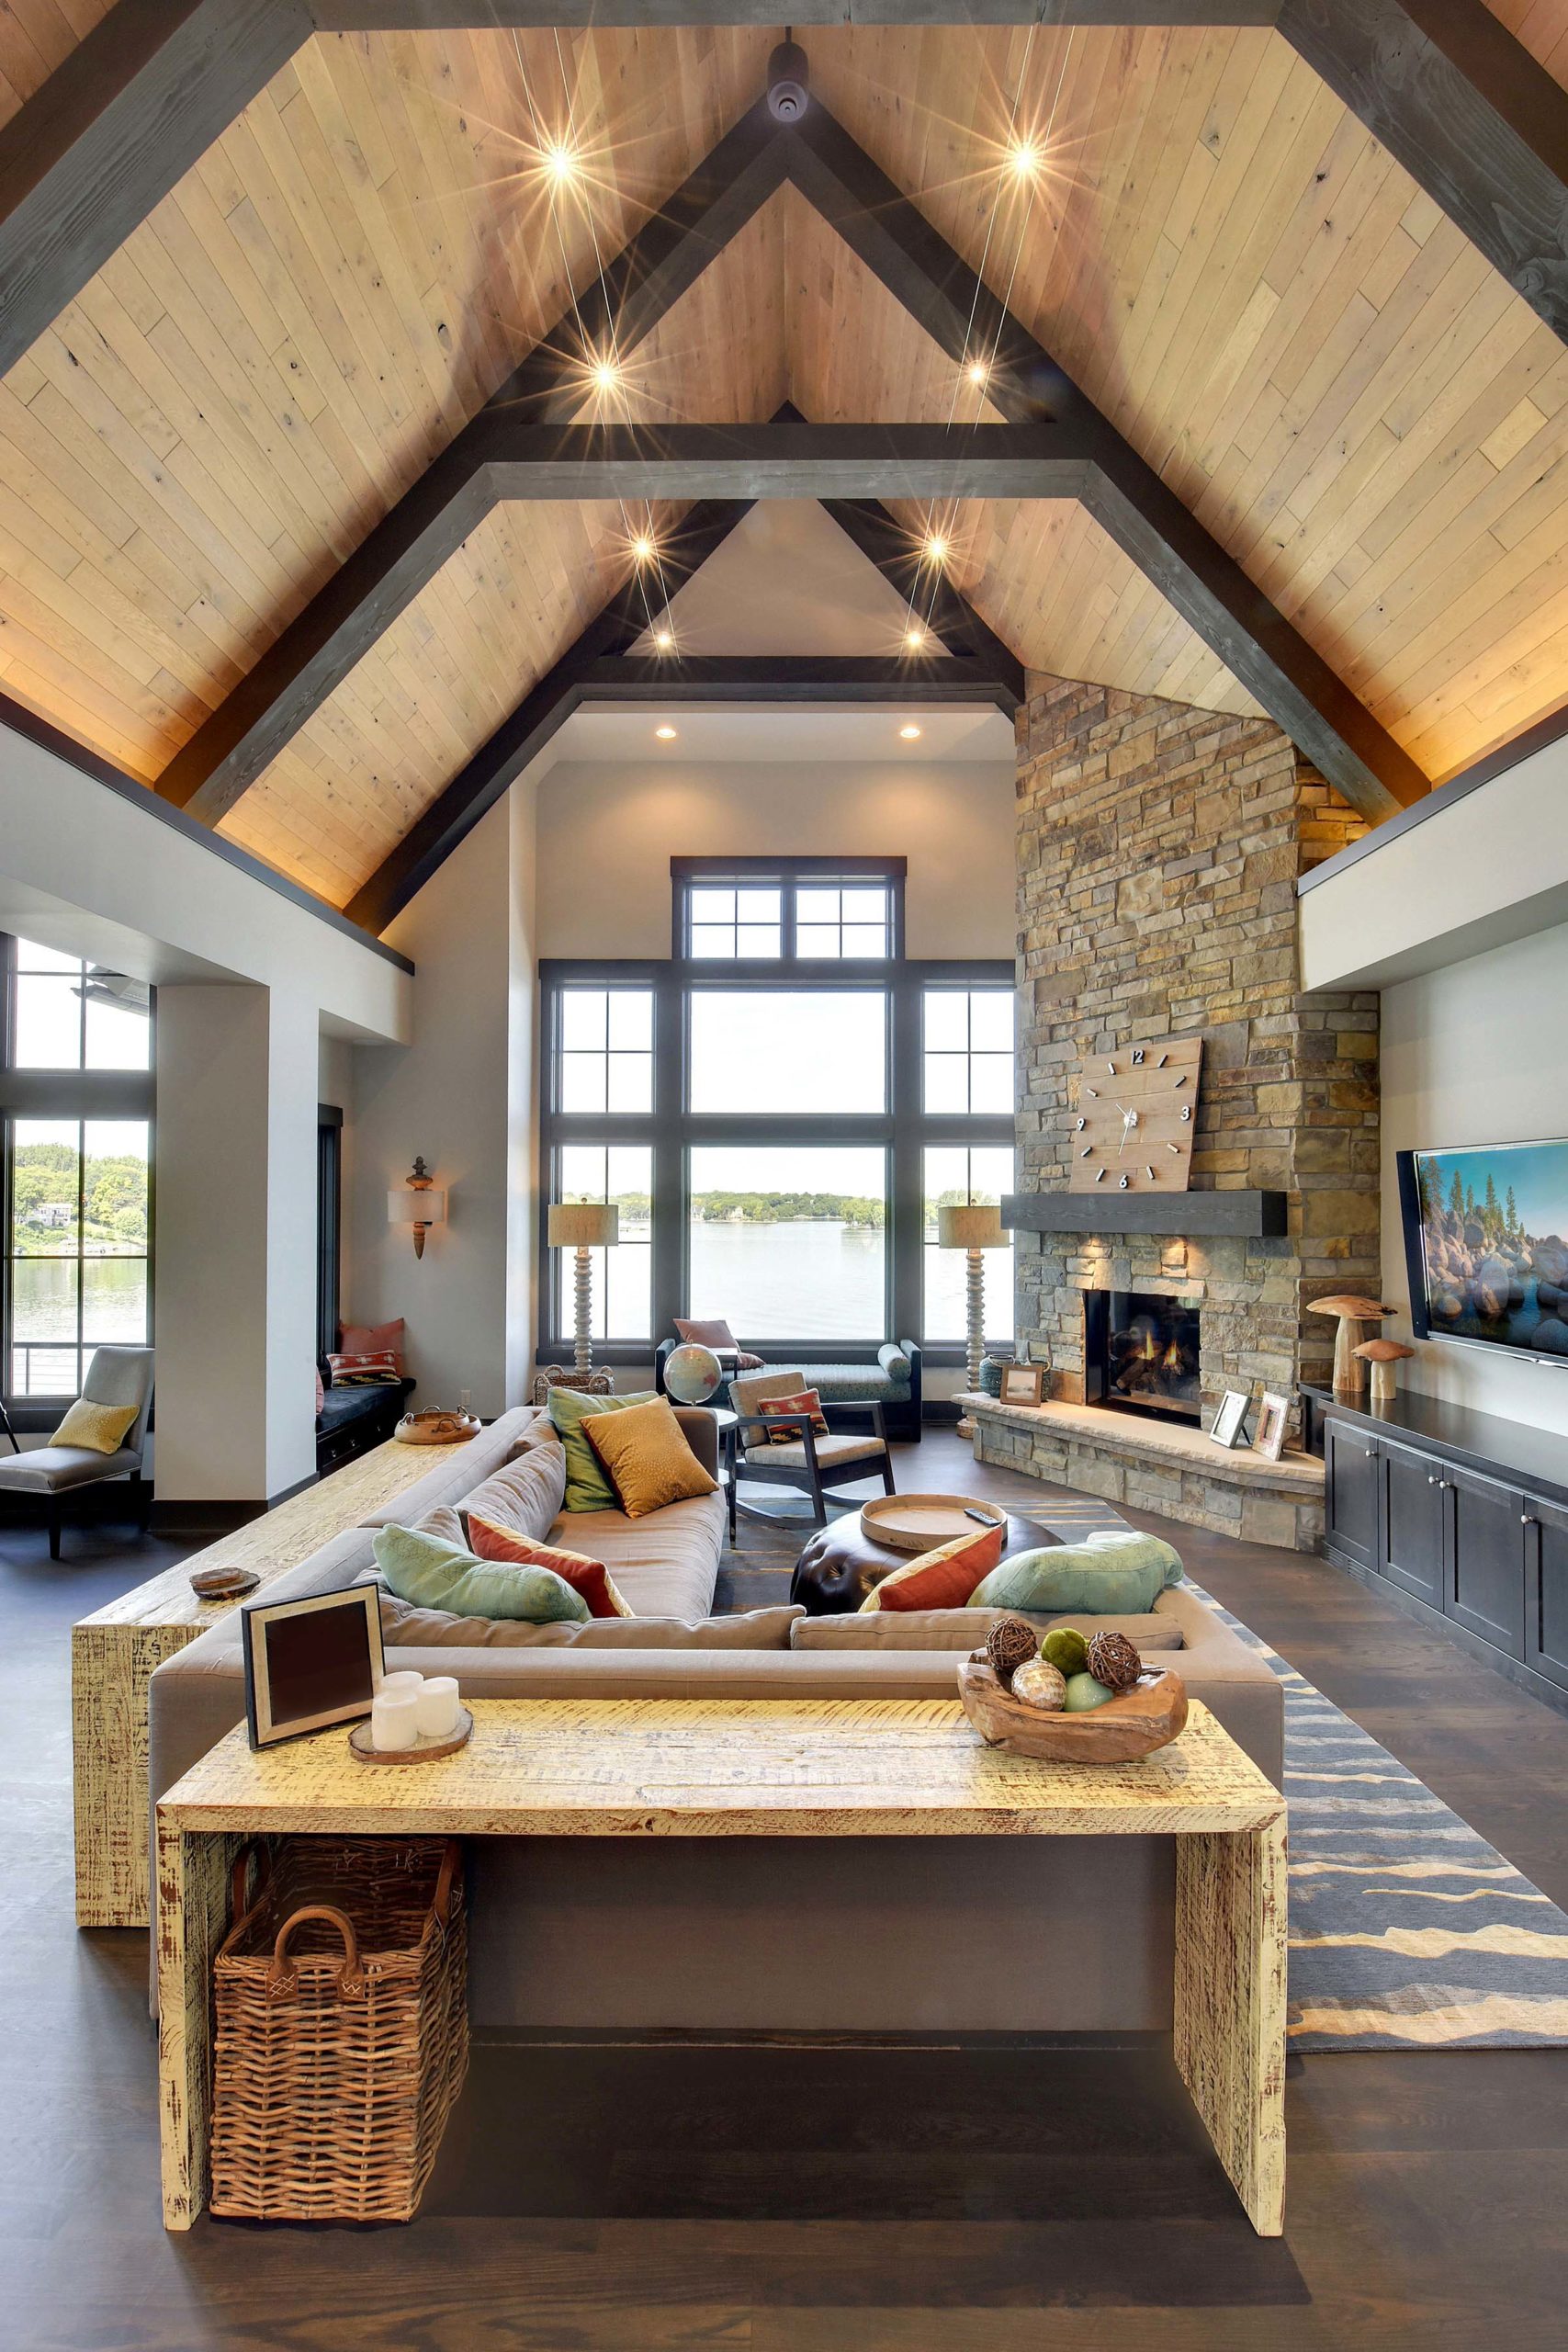 A large living room with wood beams and a fireplace, perfect for cozy gatherings and relaxation.